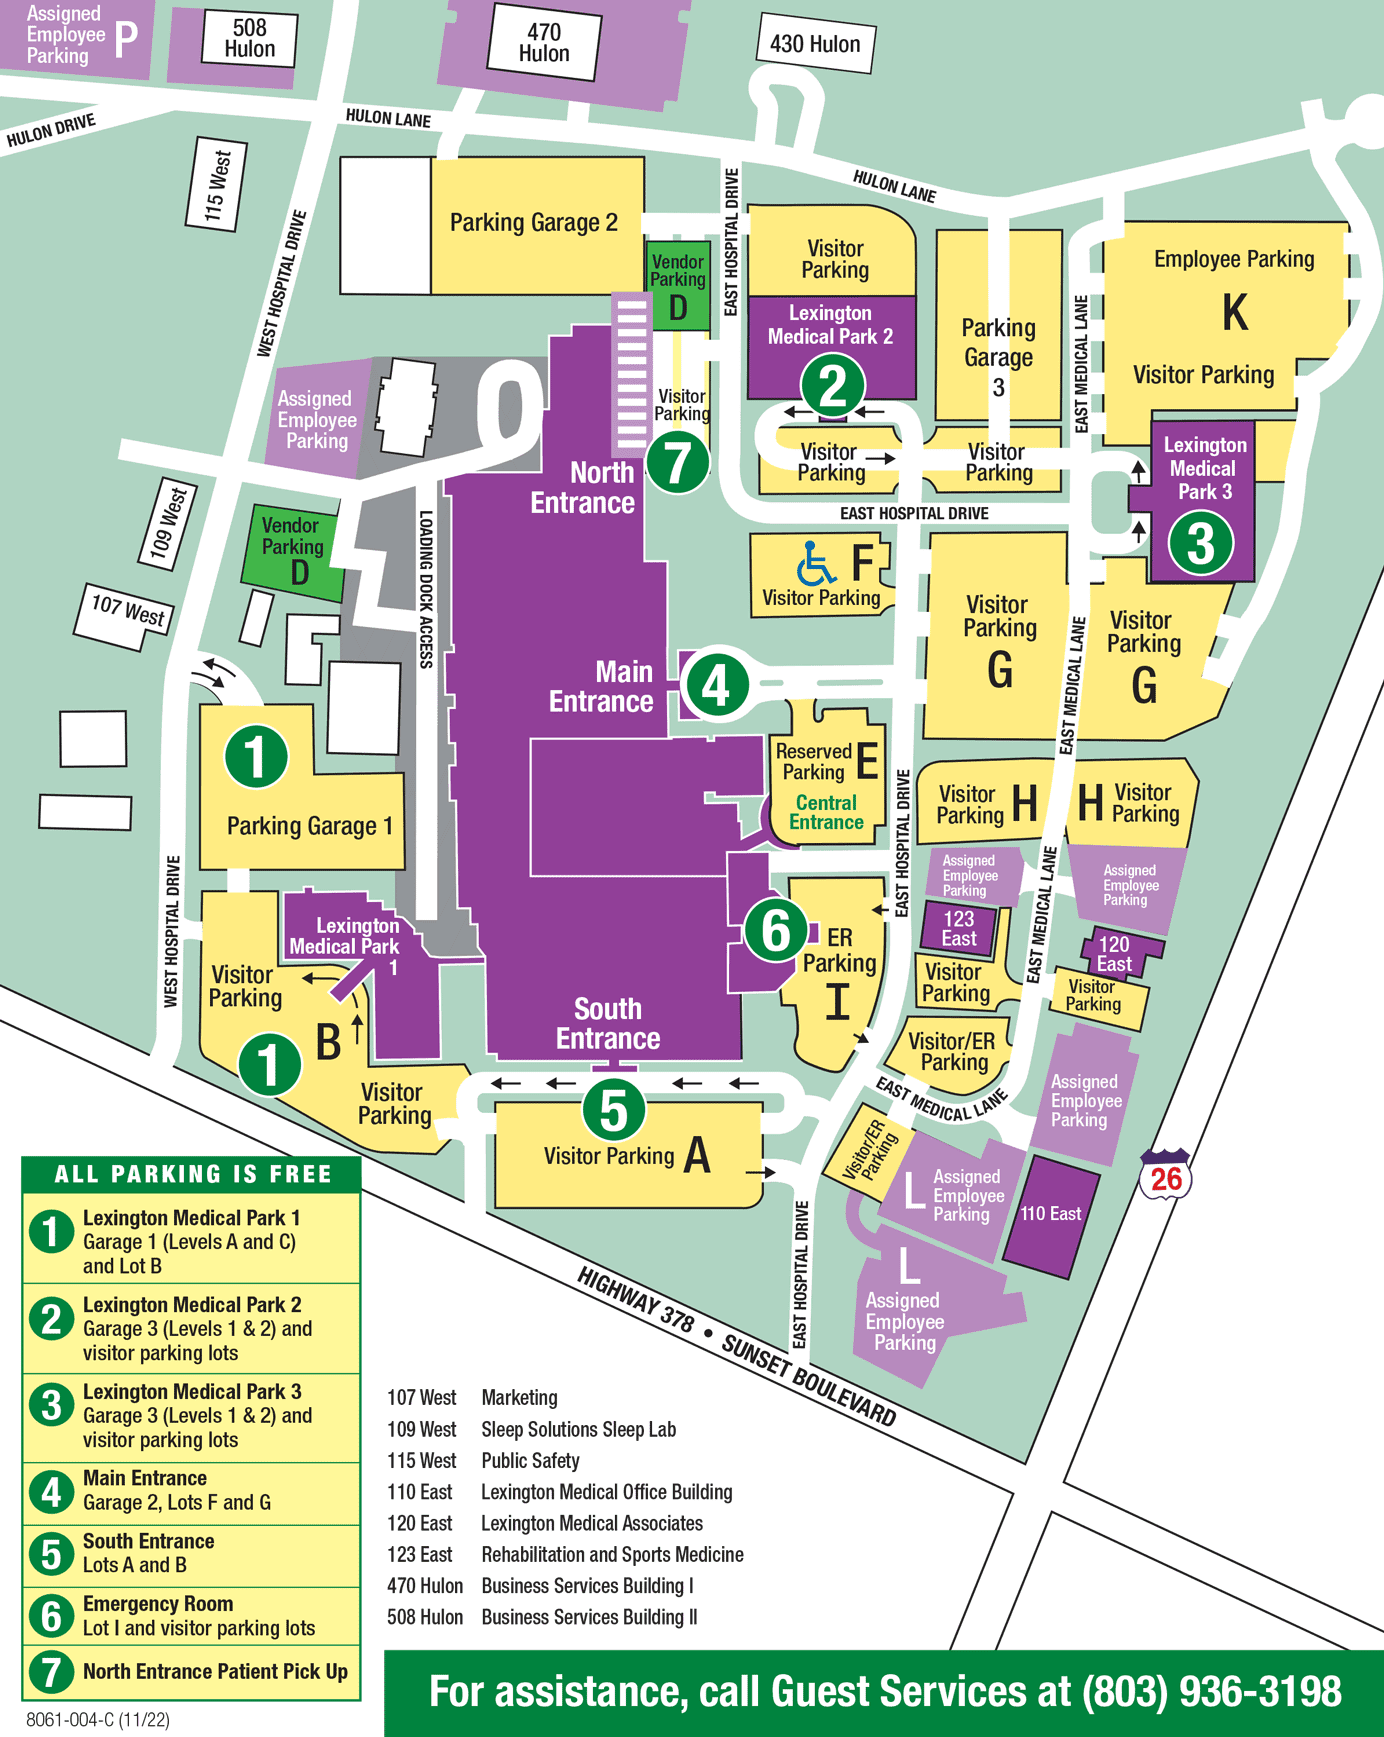 A map of the main campus highlighting free parking options, in either garages or lots, near 7 locations: Lexington Medical Parks 1 through 3, the main entrance, the south entrance, the emergency room, and the north entrance patient pickup area. For assistance, call Guest Services at (803) 936-3198.